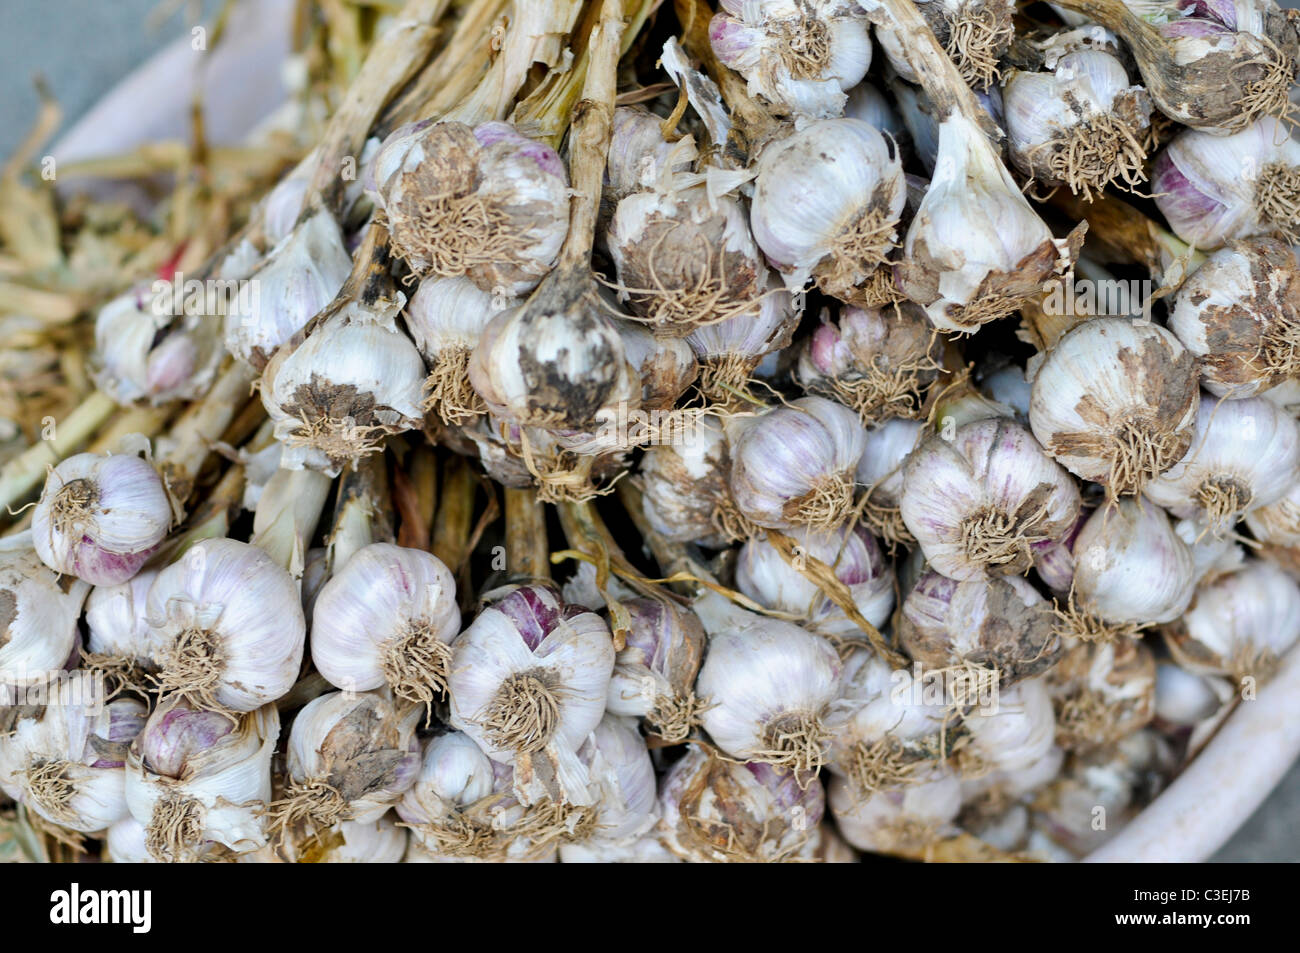 A close-up on the bulb end of a bunch of garlic.  It shows the outer skin and roots Stock Photo